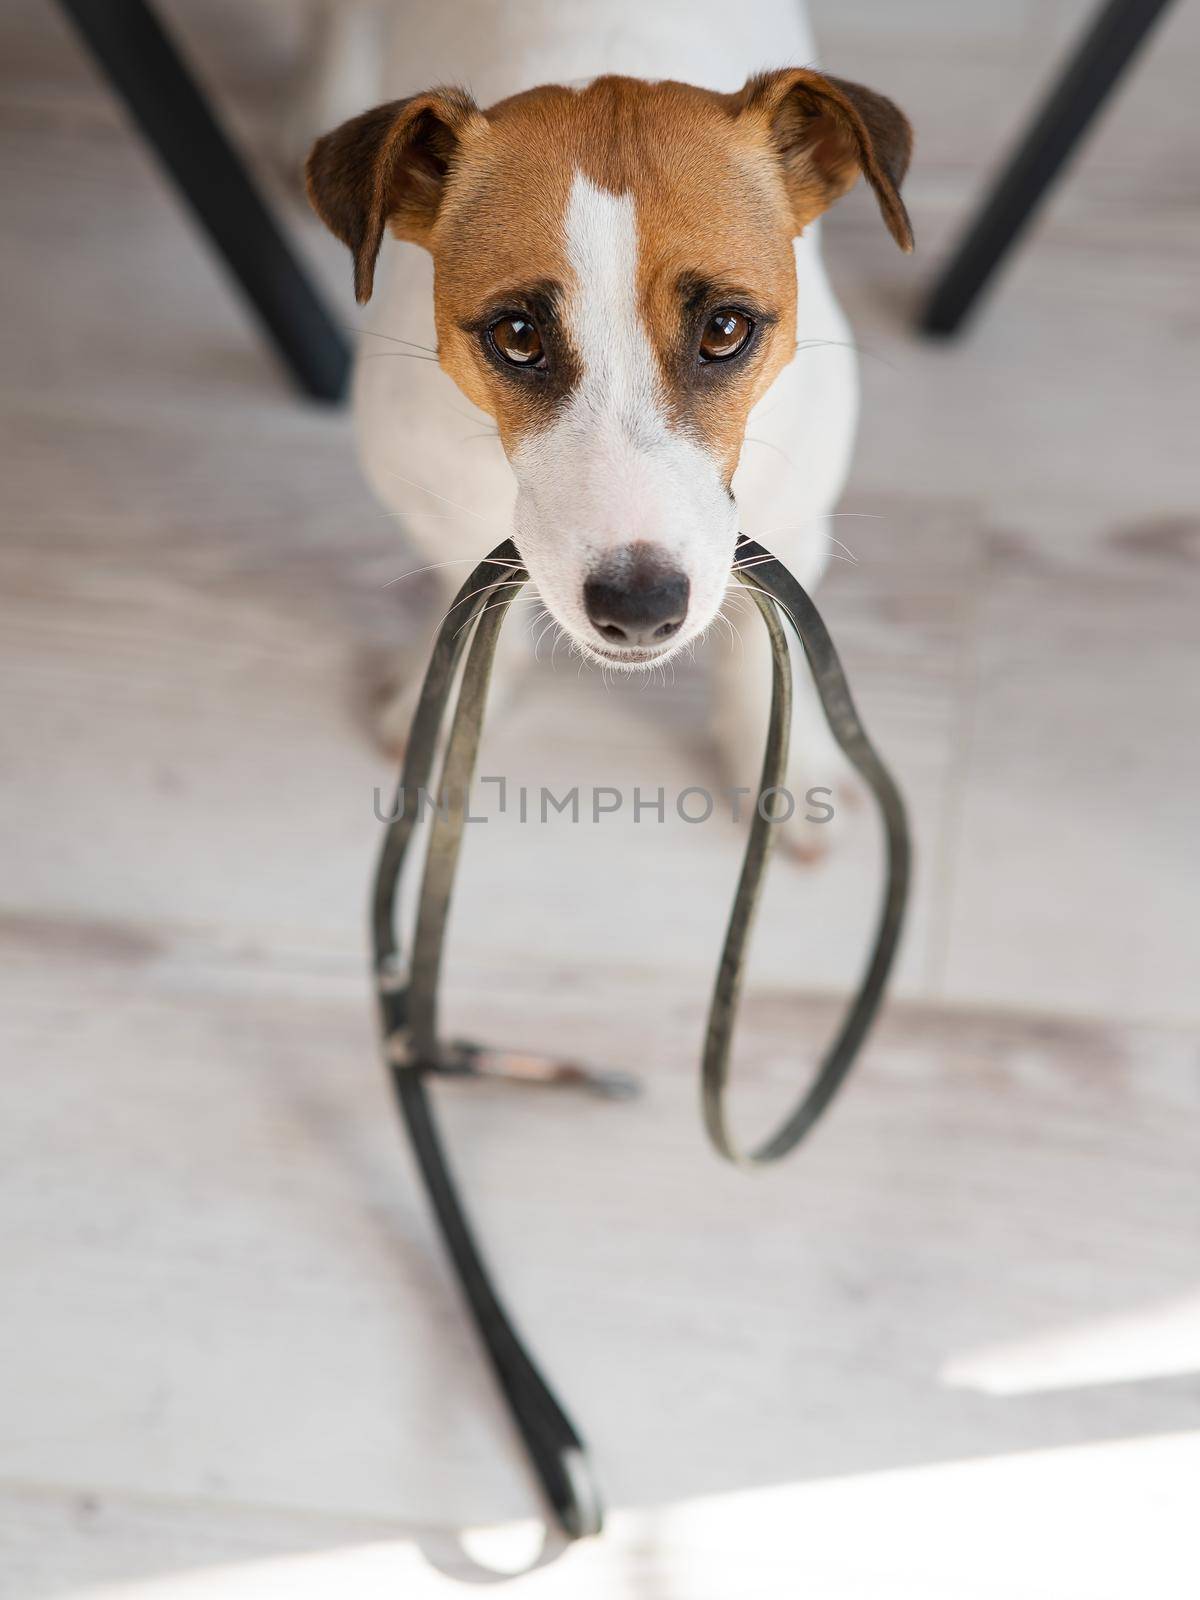 Jack Russell Terrier dog sits under the table with a leash in his teeth and calls the owner for a walk. by mrwed54